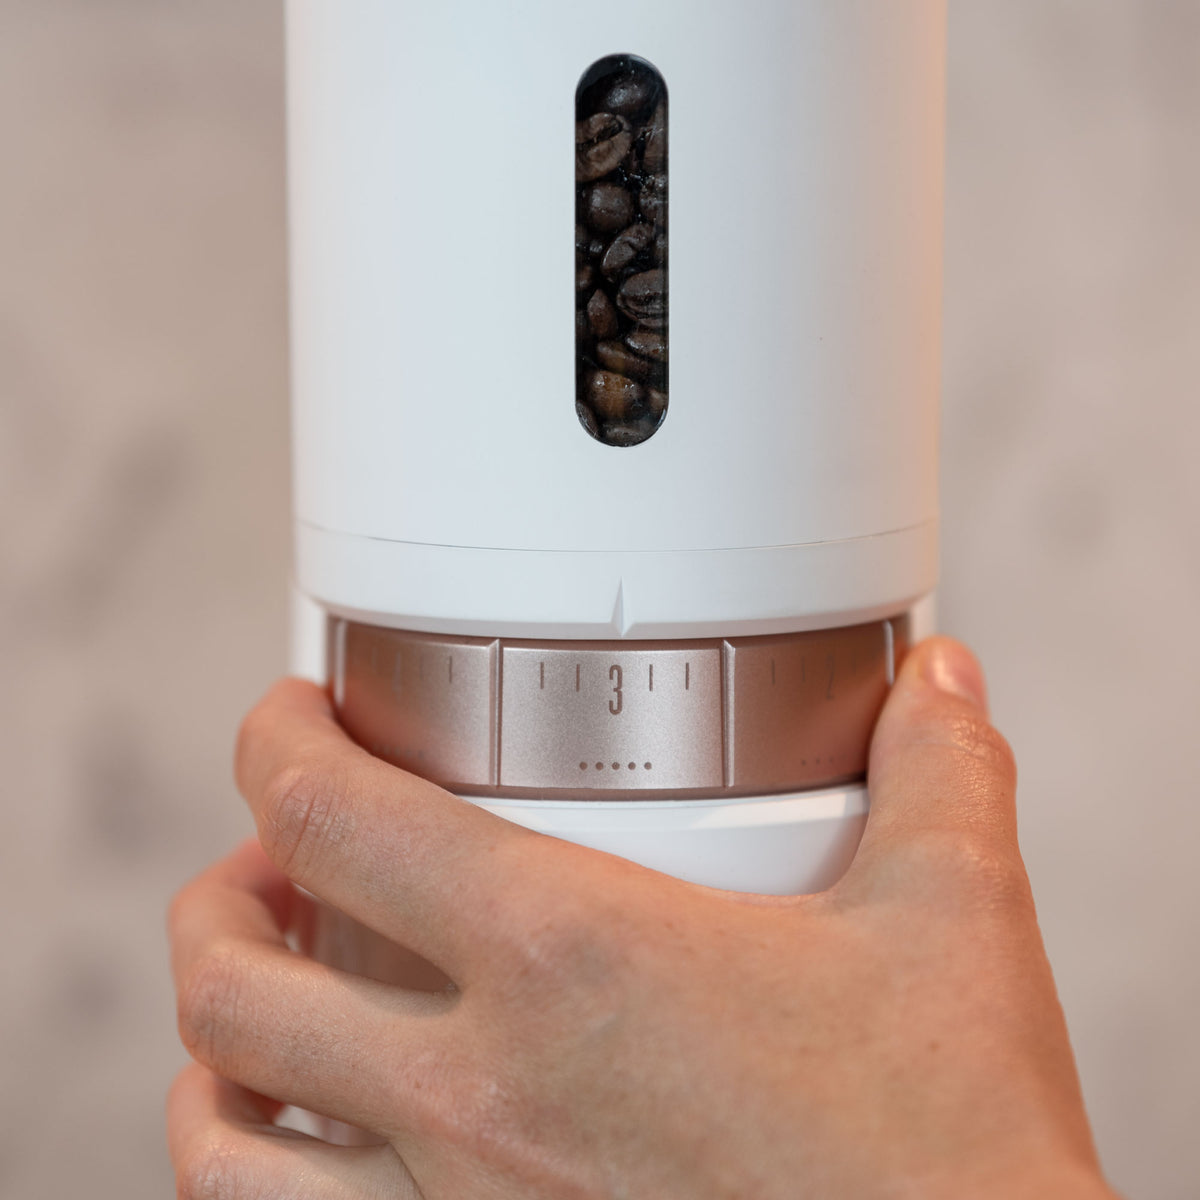 Voltaire Smart Grinder - Quest to waking up to freshly ground coffee -  Digital Reviews Network